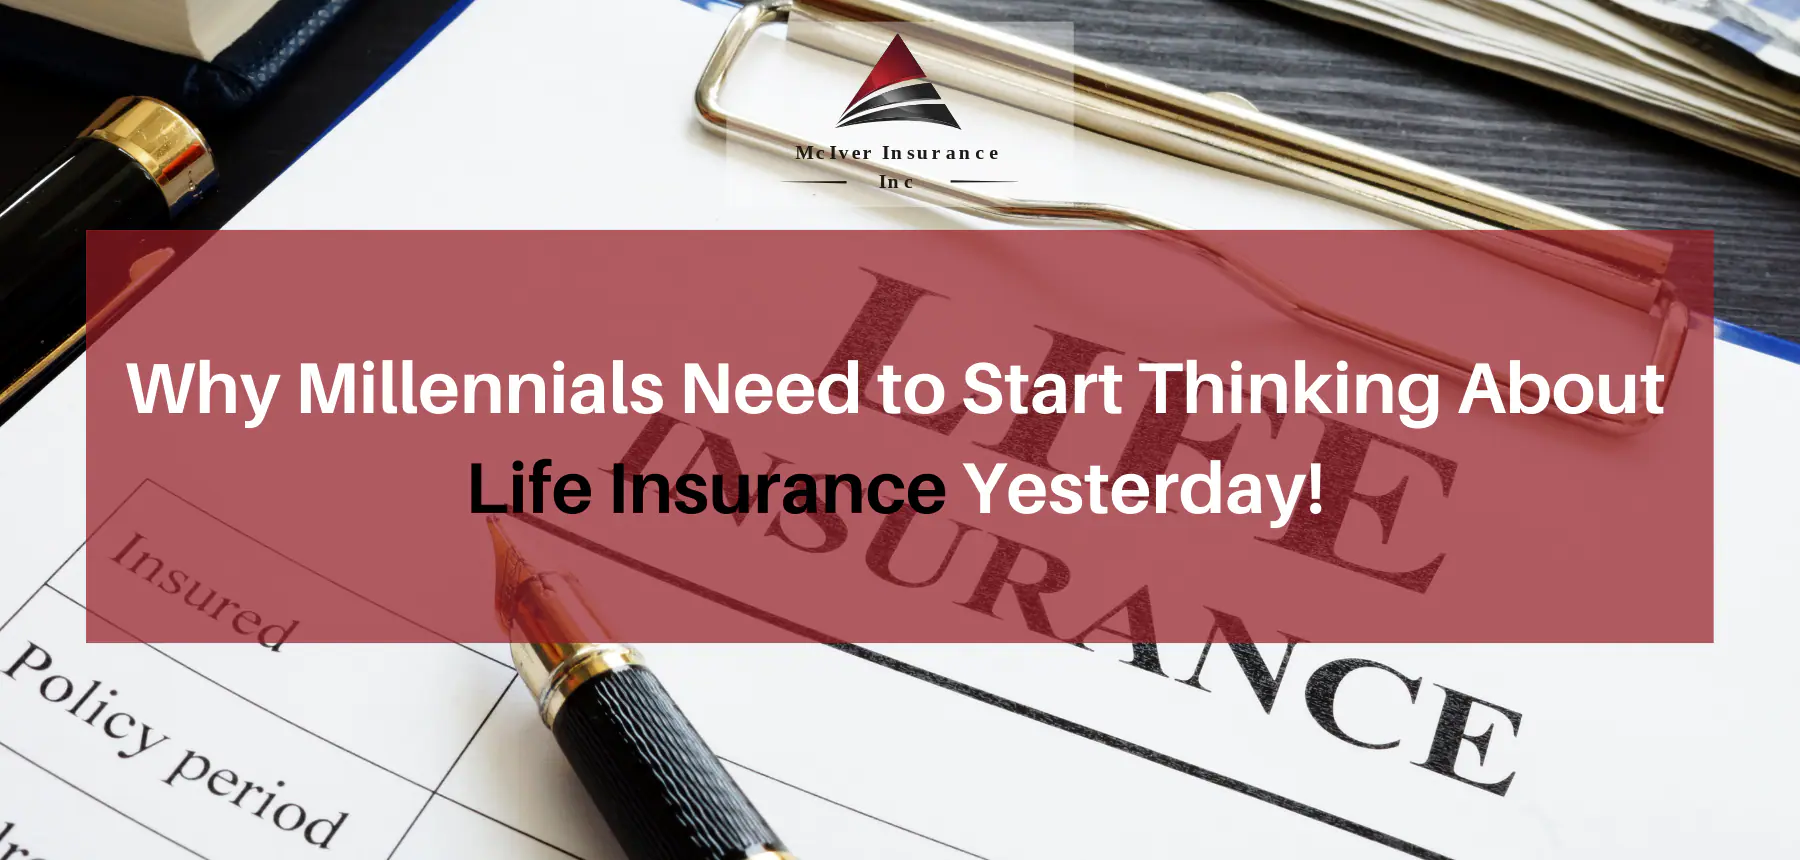 Why Millennials Need to Start Thinking About Life Insurance Yesterday!